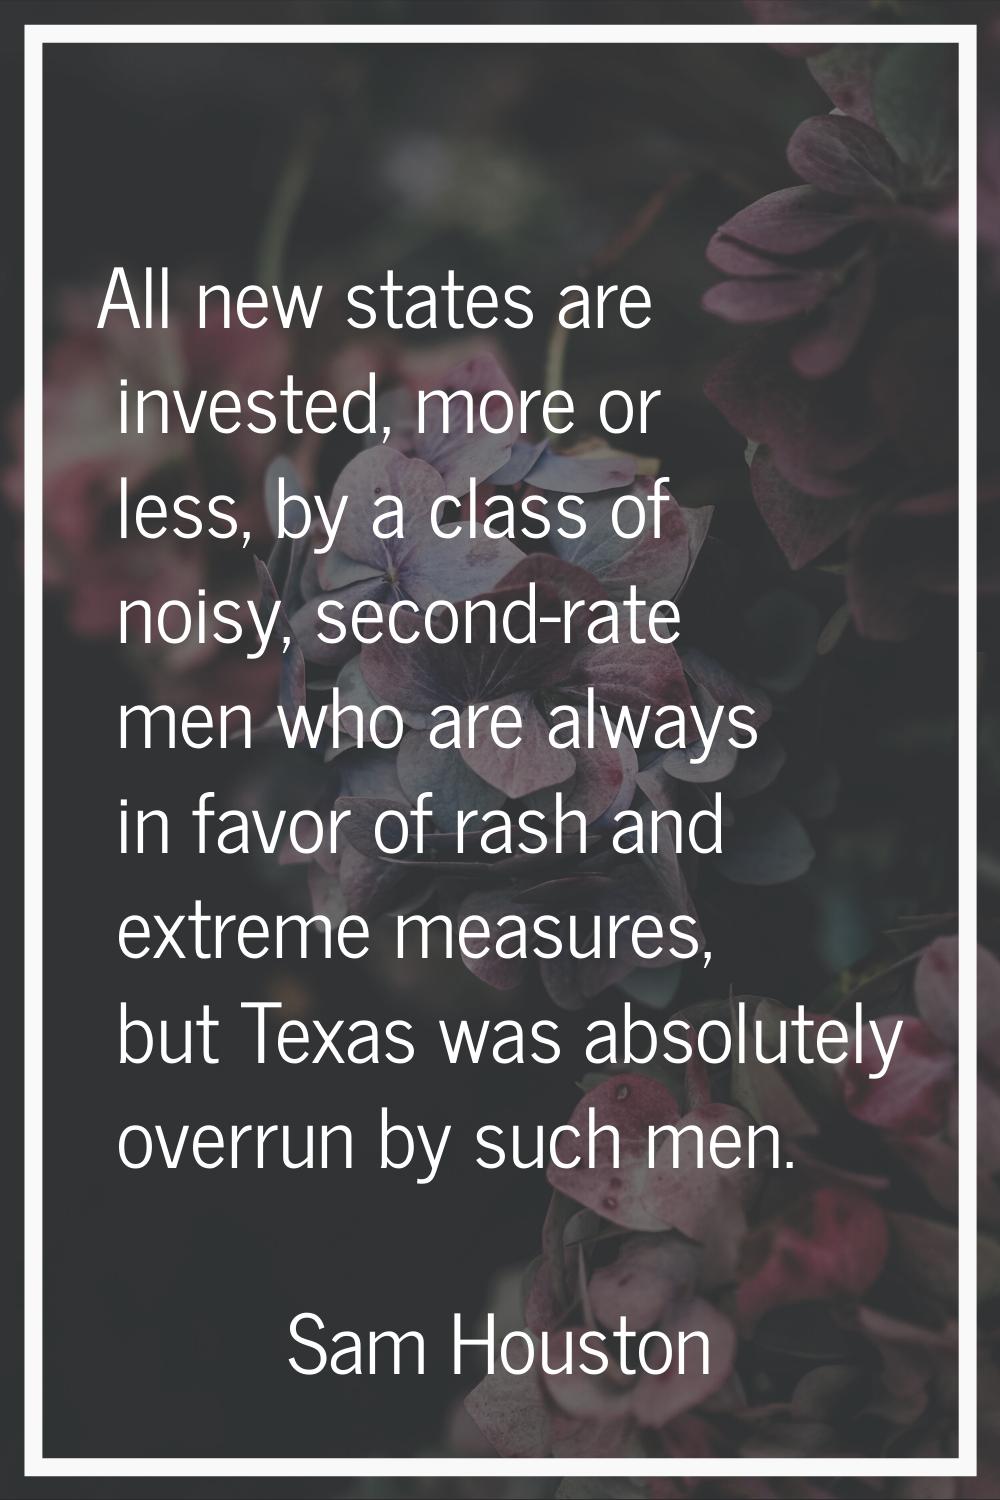 All new states are invested, more or less, by a class of noisy, second-rate men who are always in f